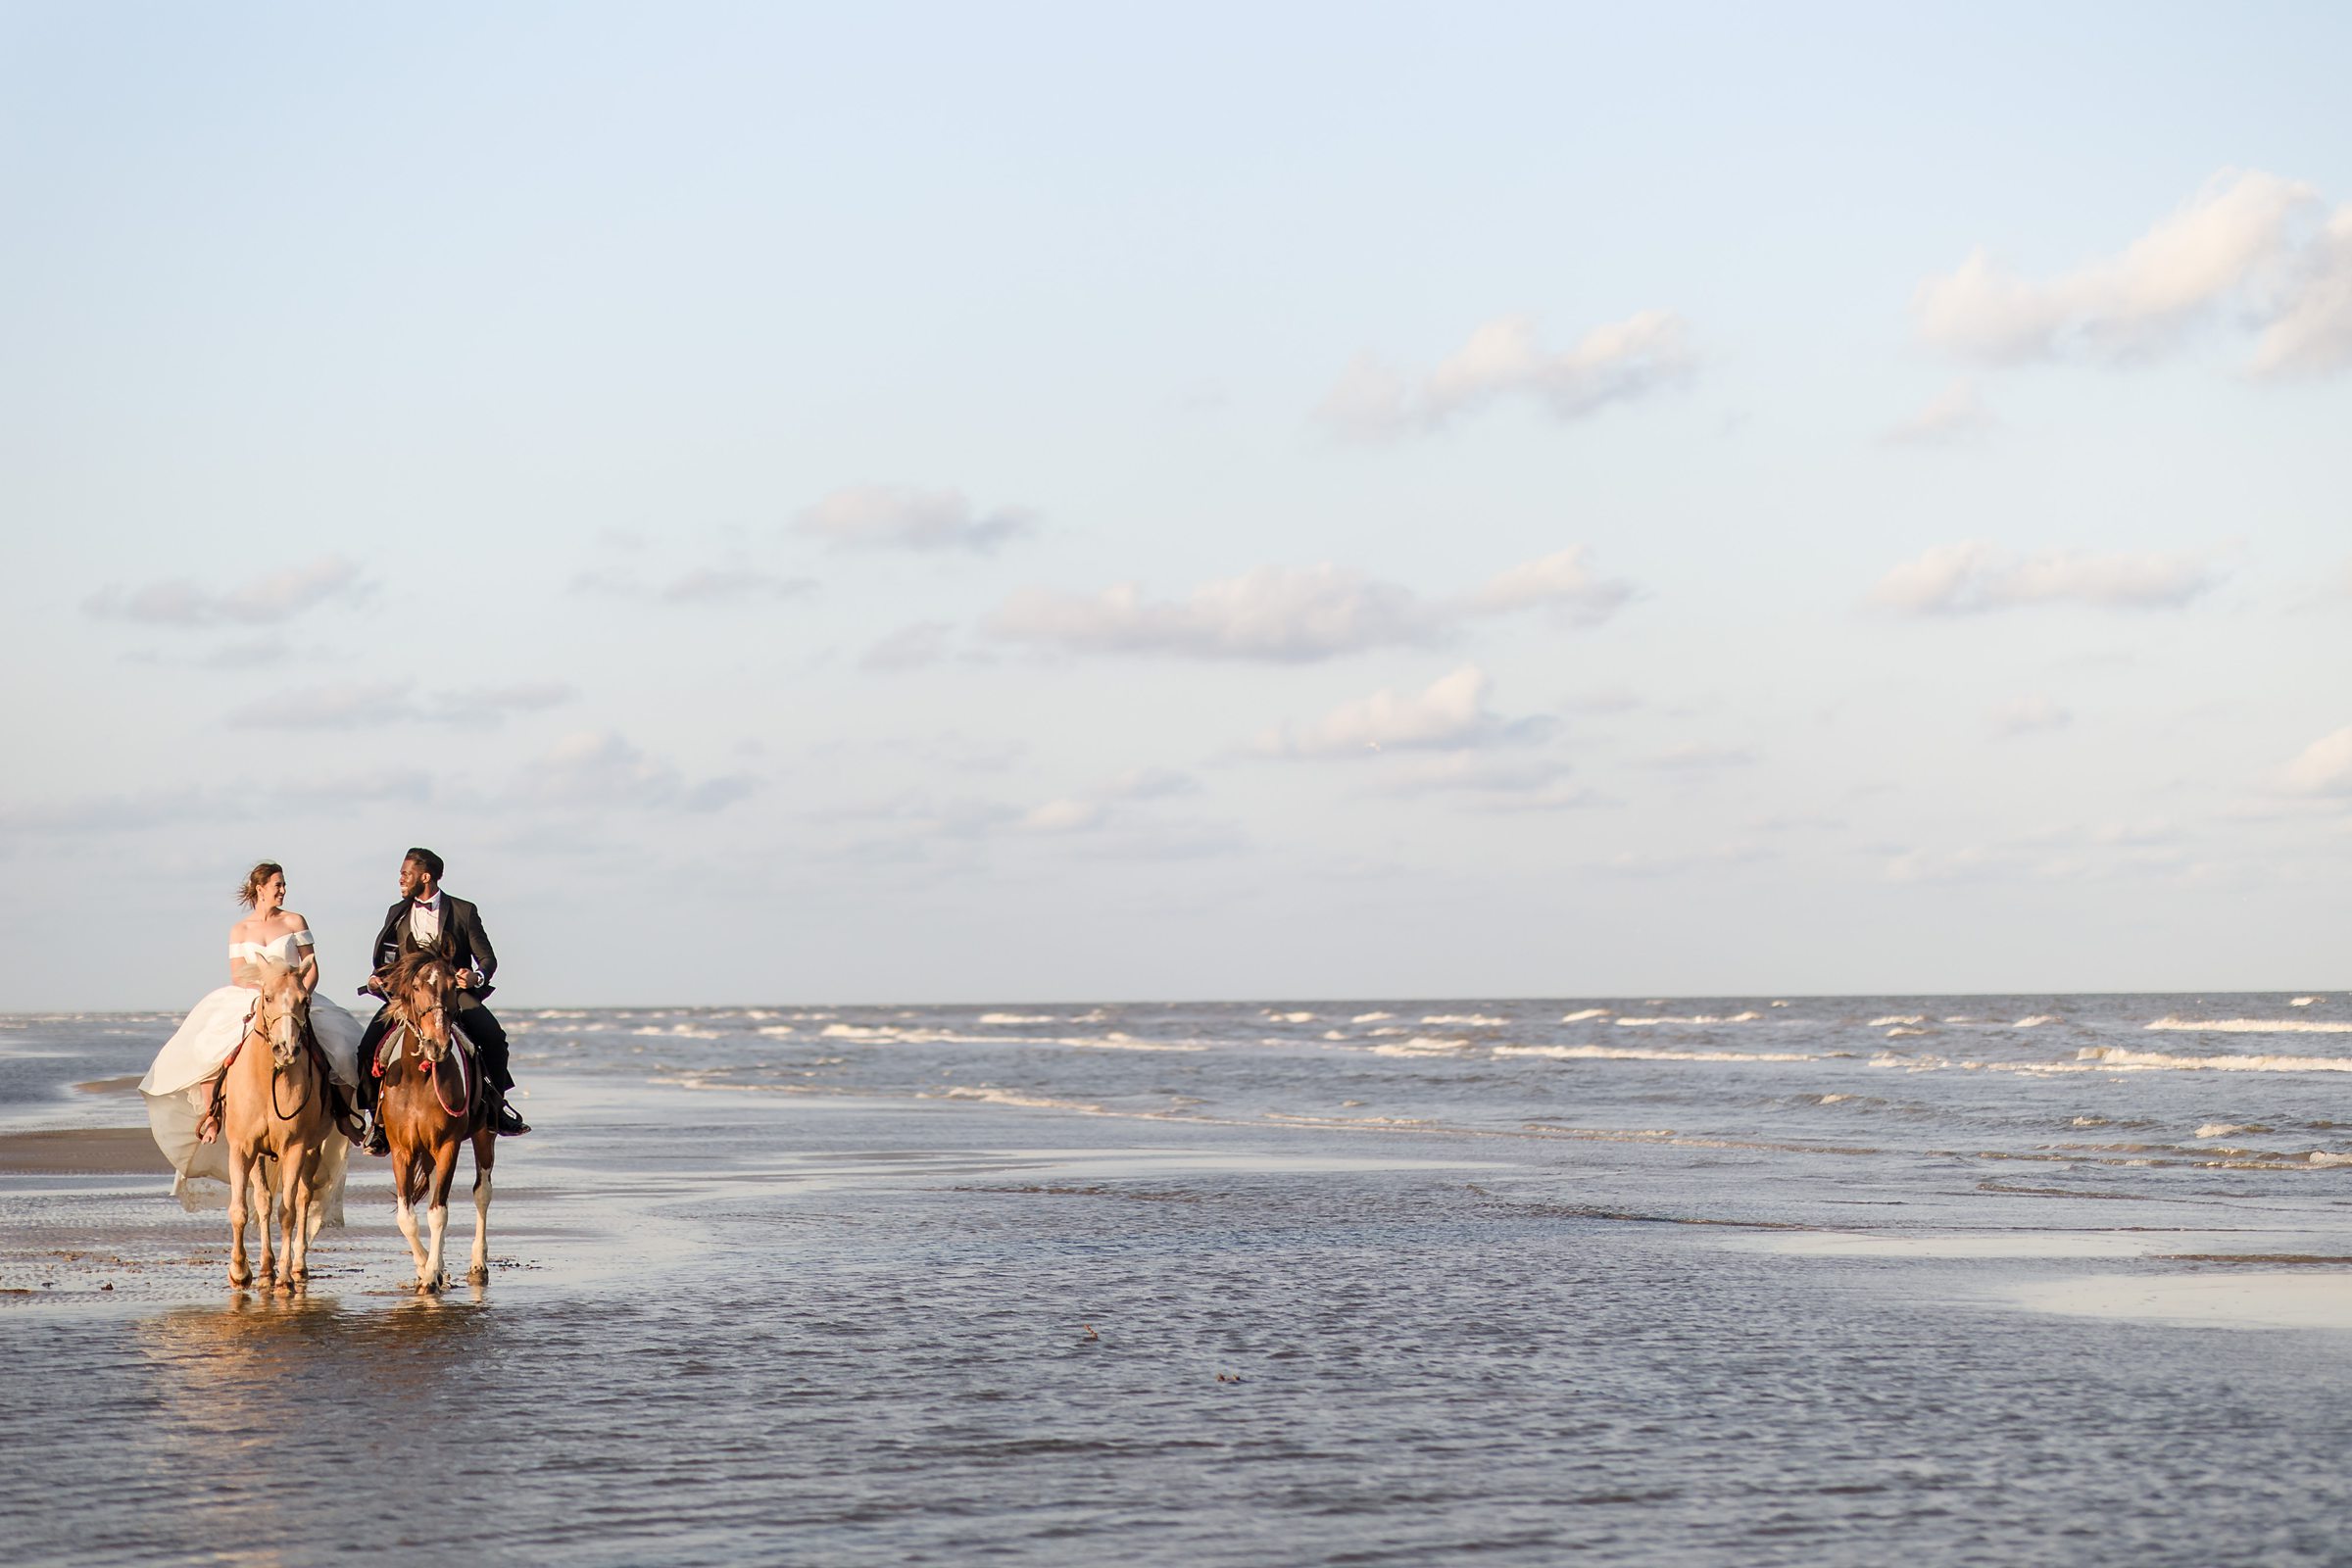 Bride and groom ride horses in the ocean during an elopement at Galveston Beach in Texas